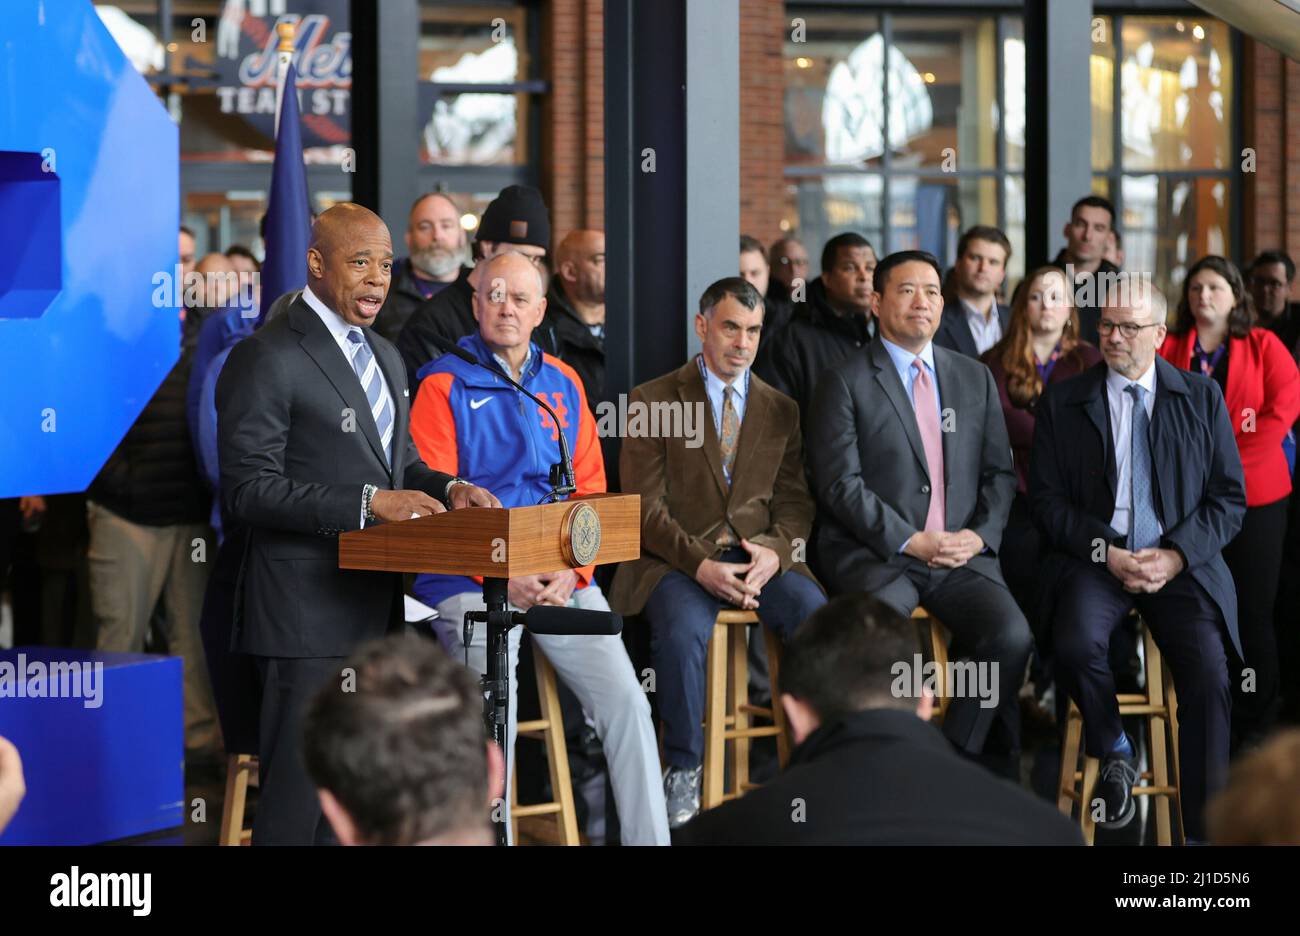 Citi Field, Flushing, New York, USA, March 24, 2022 - Mayor Eric Adams exempted the city athletes and performers from the COVID-19 vaccine mandate today during a presserat the Mets Stadium in Flushing New York. Photo: Luiz Rampelotto/EuropaNewswire PHOTO CREDIT MANDATORY. Stock Photo